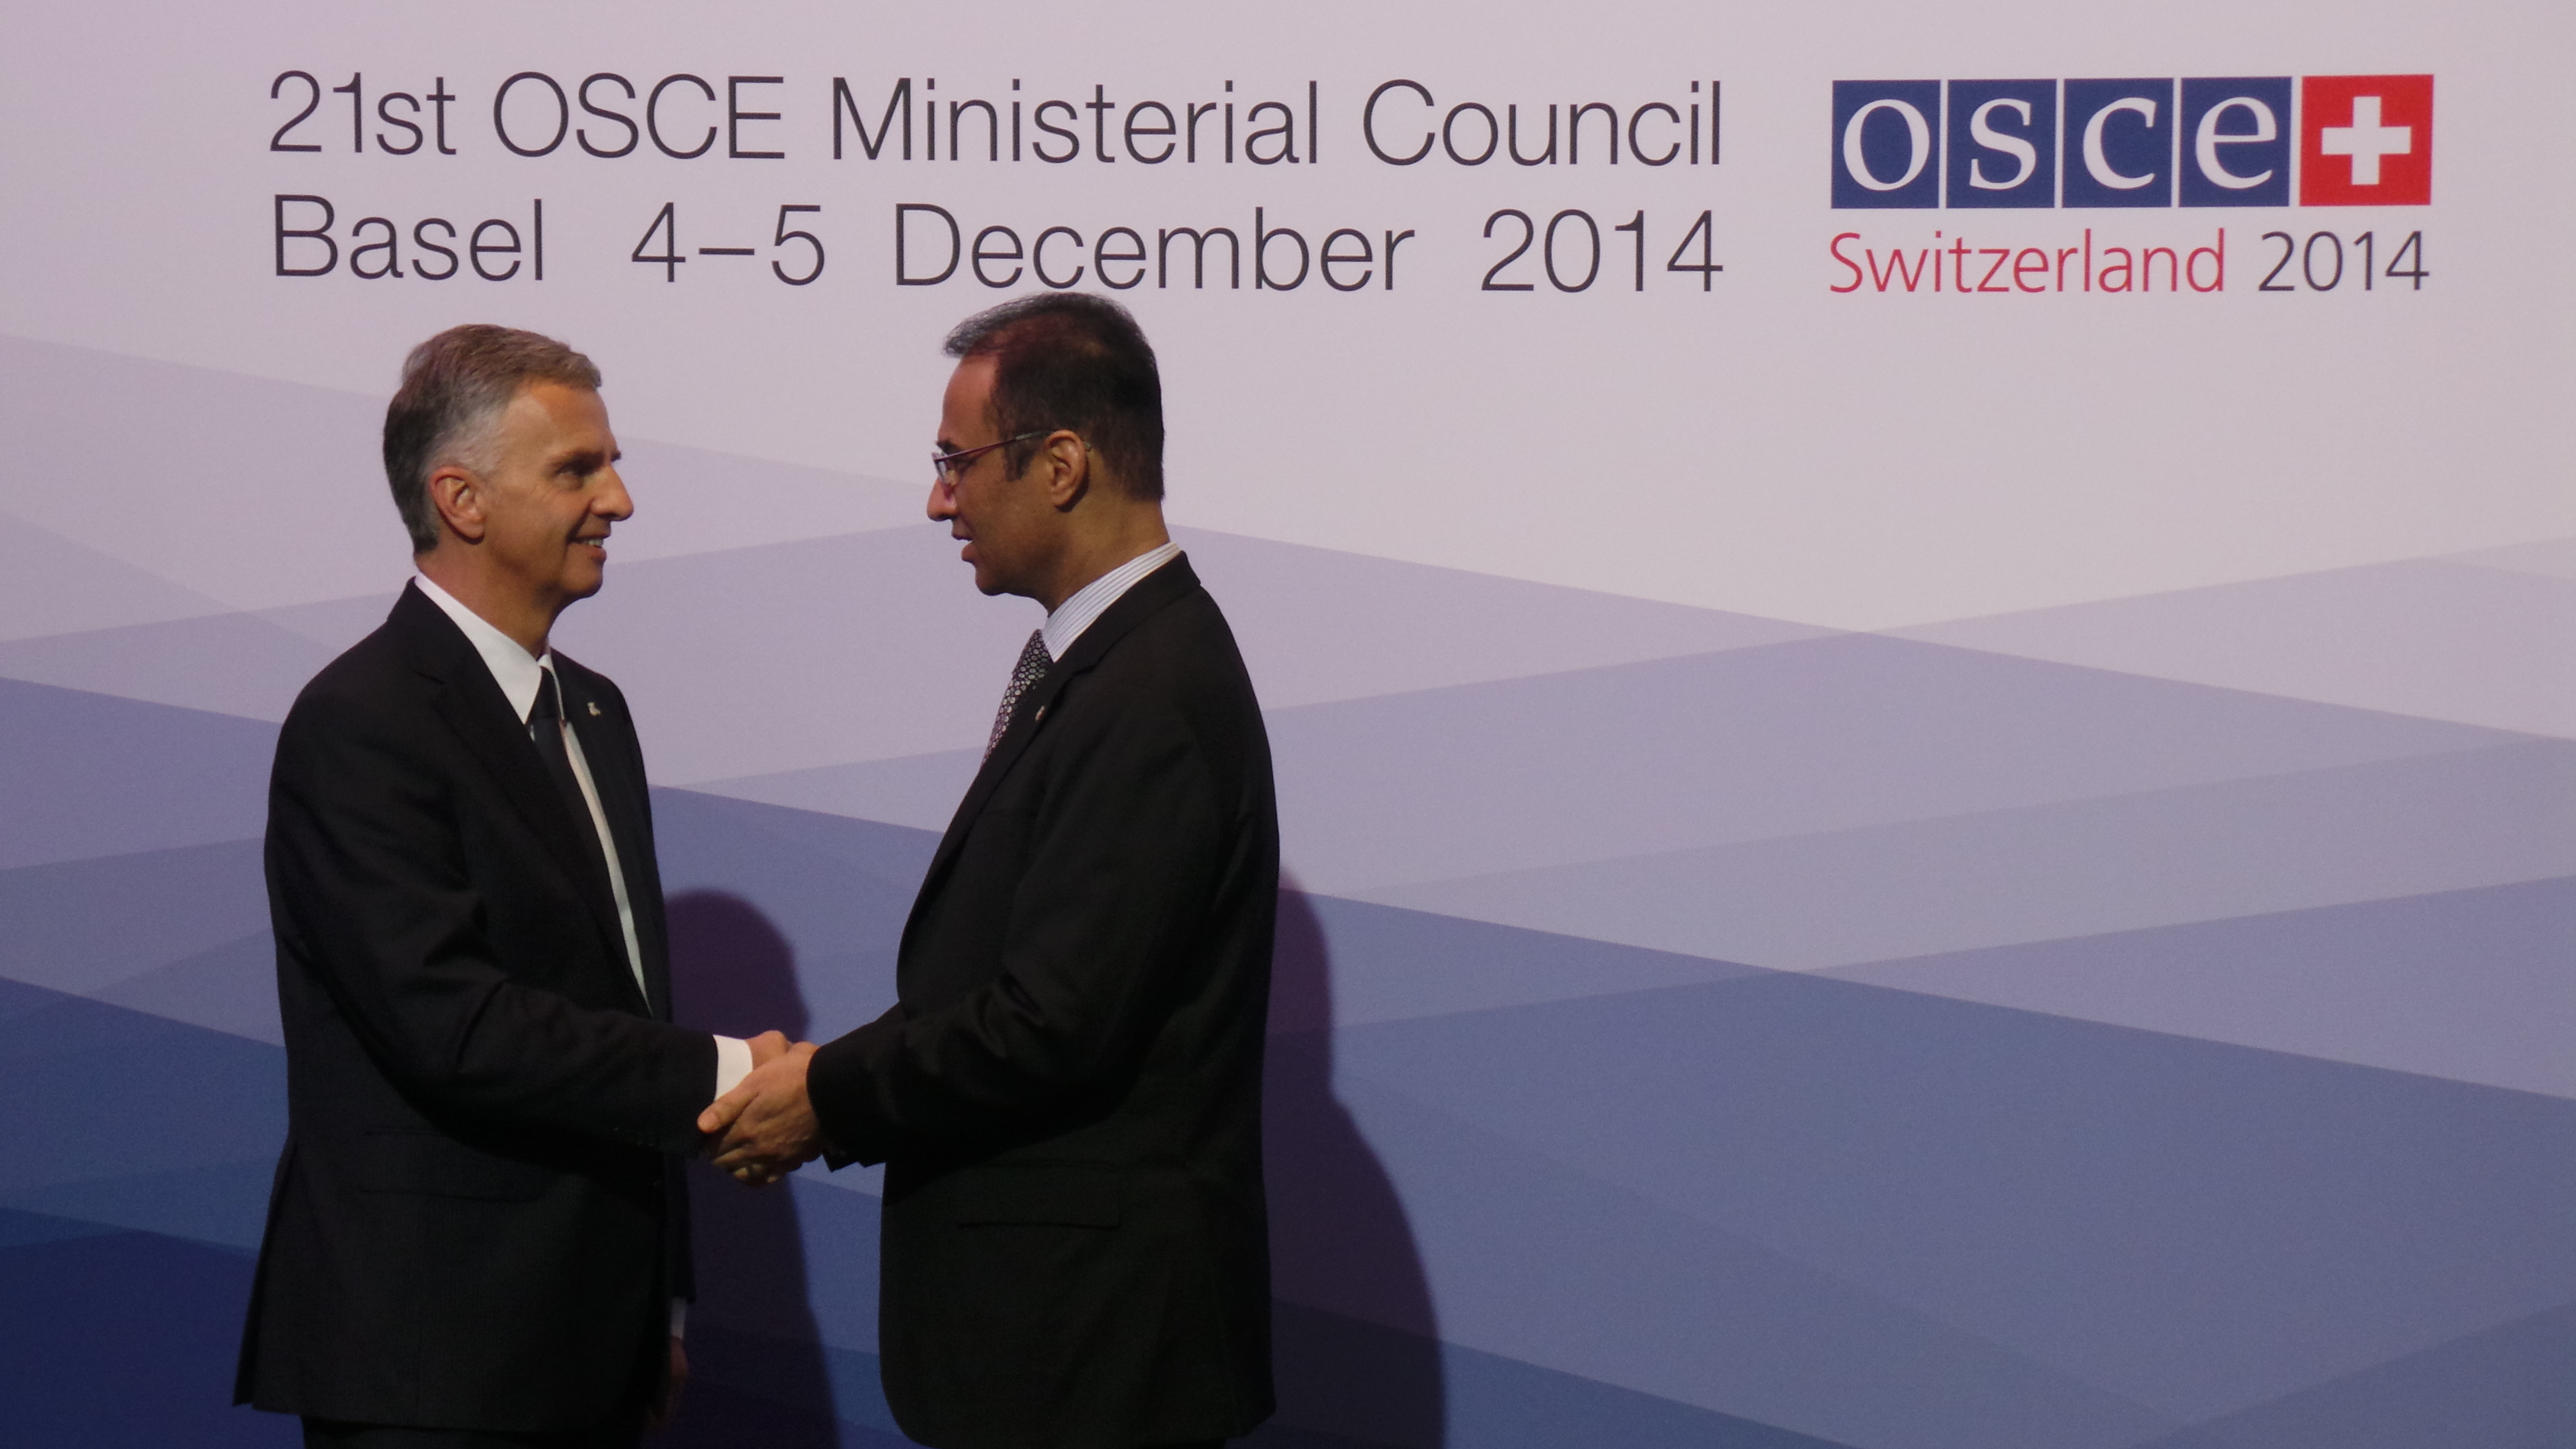 The President of the Swiss Confederation, Didier Burkhalter, greets Ayoob Erfani, permanent Representative to the OSCE in Afghanistan at the OSCE Ministerial Council 2014 in Basel.